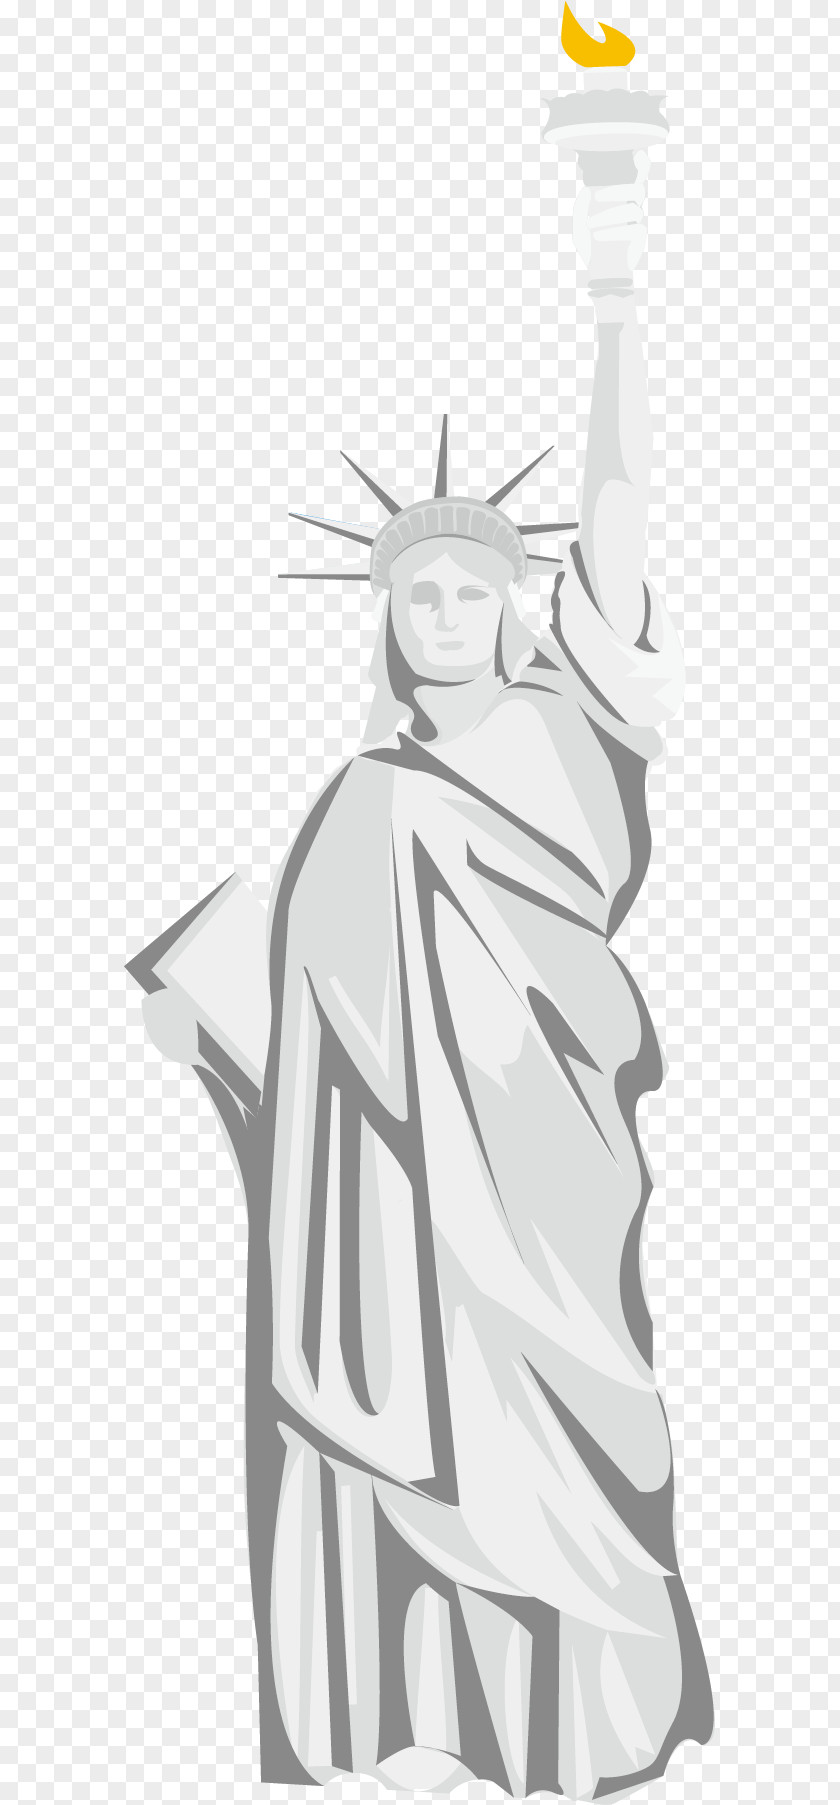 Statue Of Liberty Black And White PNG